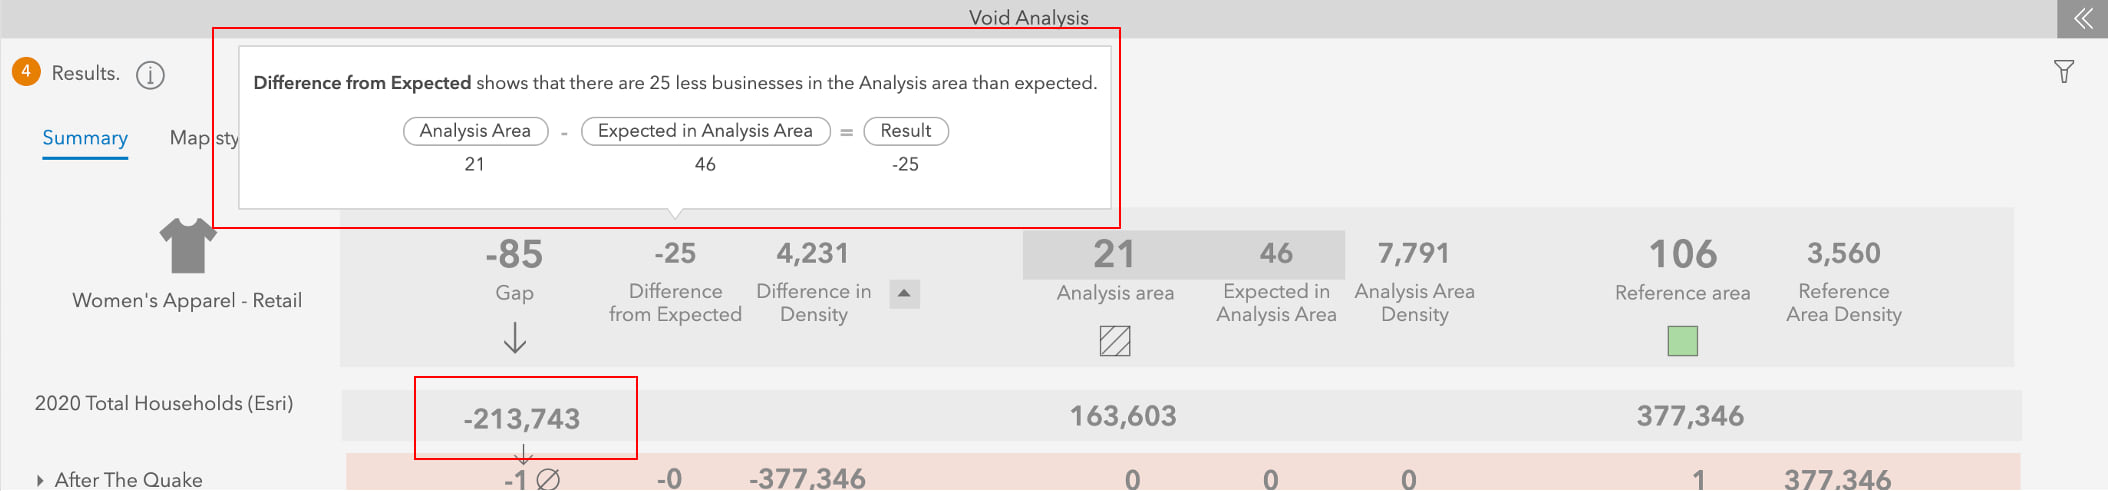 Void Analysis normalization in ArcGIS Business Analyst Web App – normalized result tooltip explanation